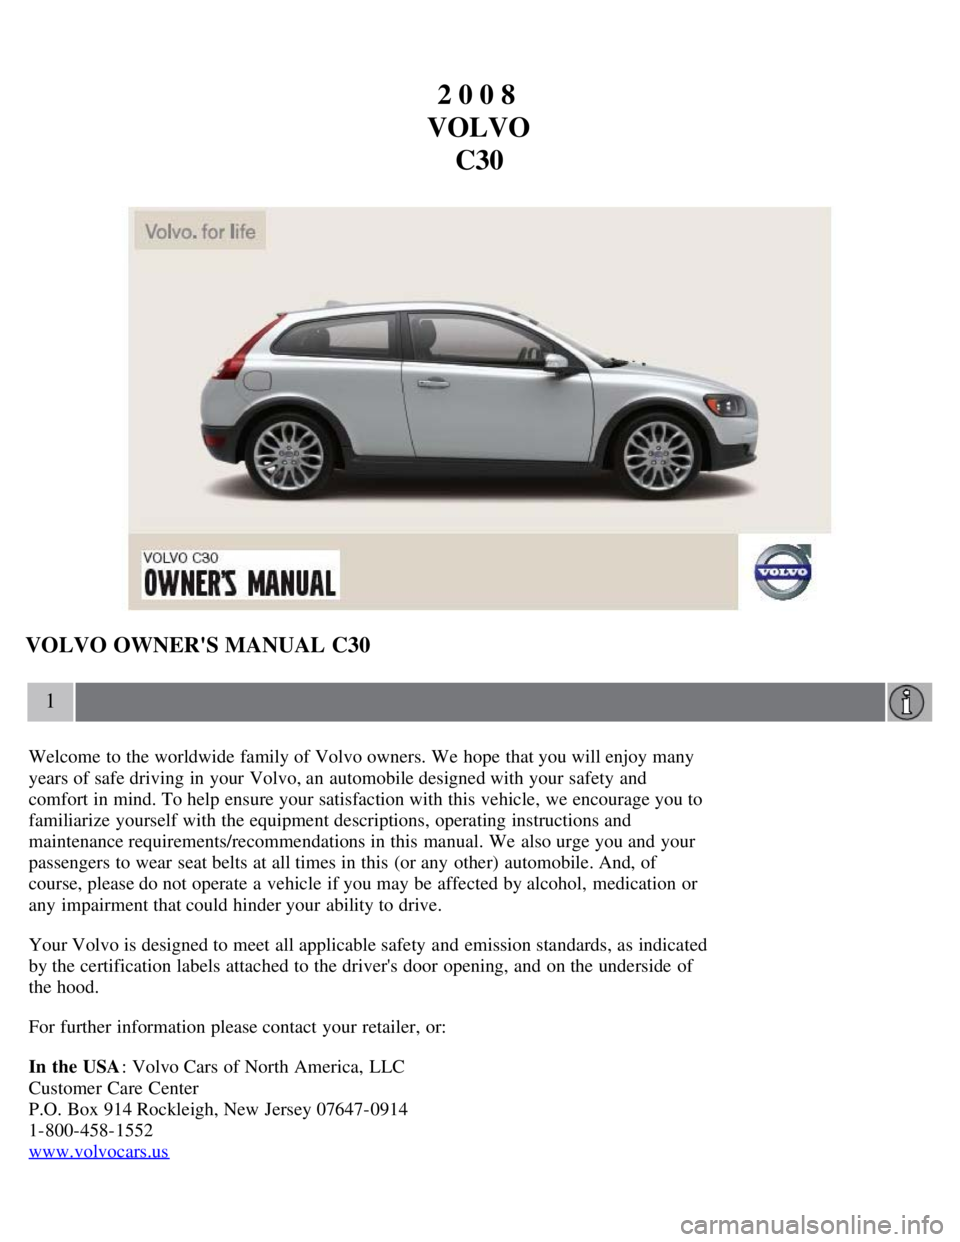 VOLVO C30 2008  Owners Manual 2 0 0 8 
VOLVO C30
VOLVO OWNERS MANUAL C30
1
Welcome to the worldwide family of Volvo owners. We hope  that you will enjoy many
years of safe driving in your Volvo, an  automobile designed with your 